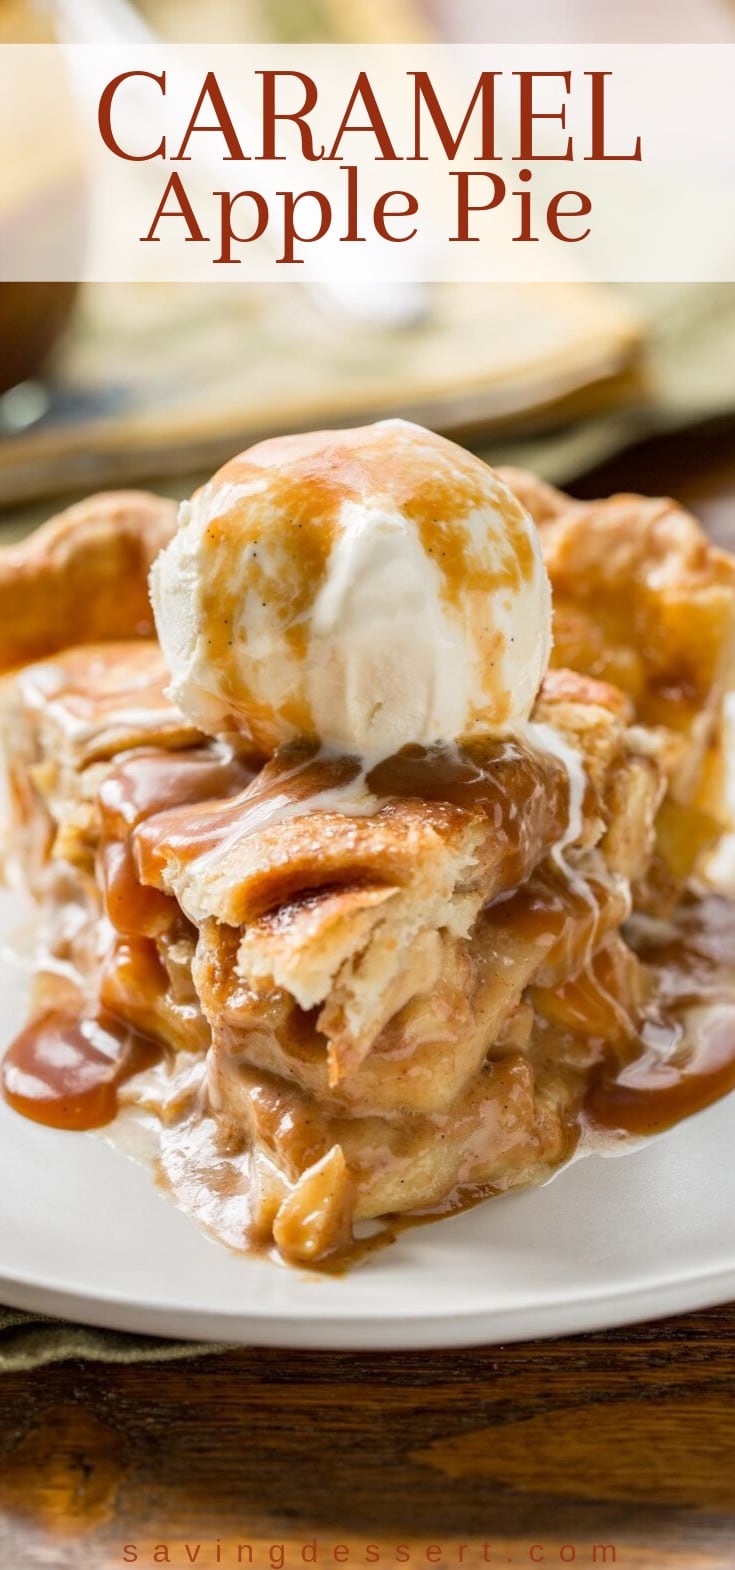 A slice of caramel apple pie topped with a scoop of ice cream and more caramel